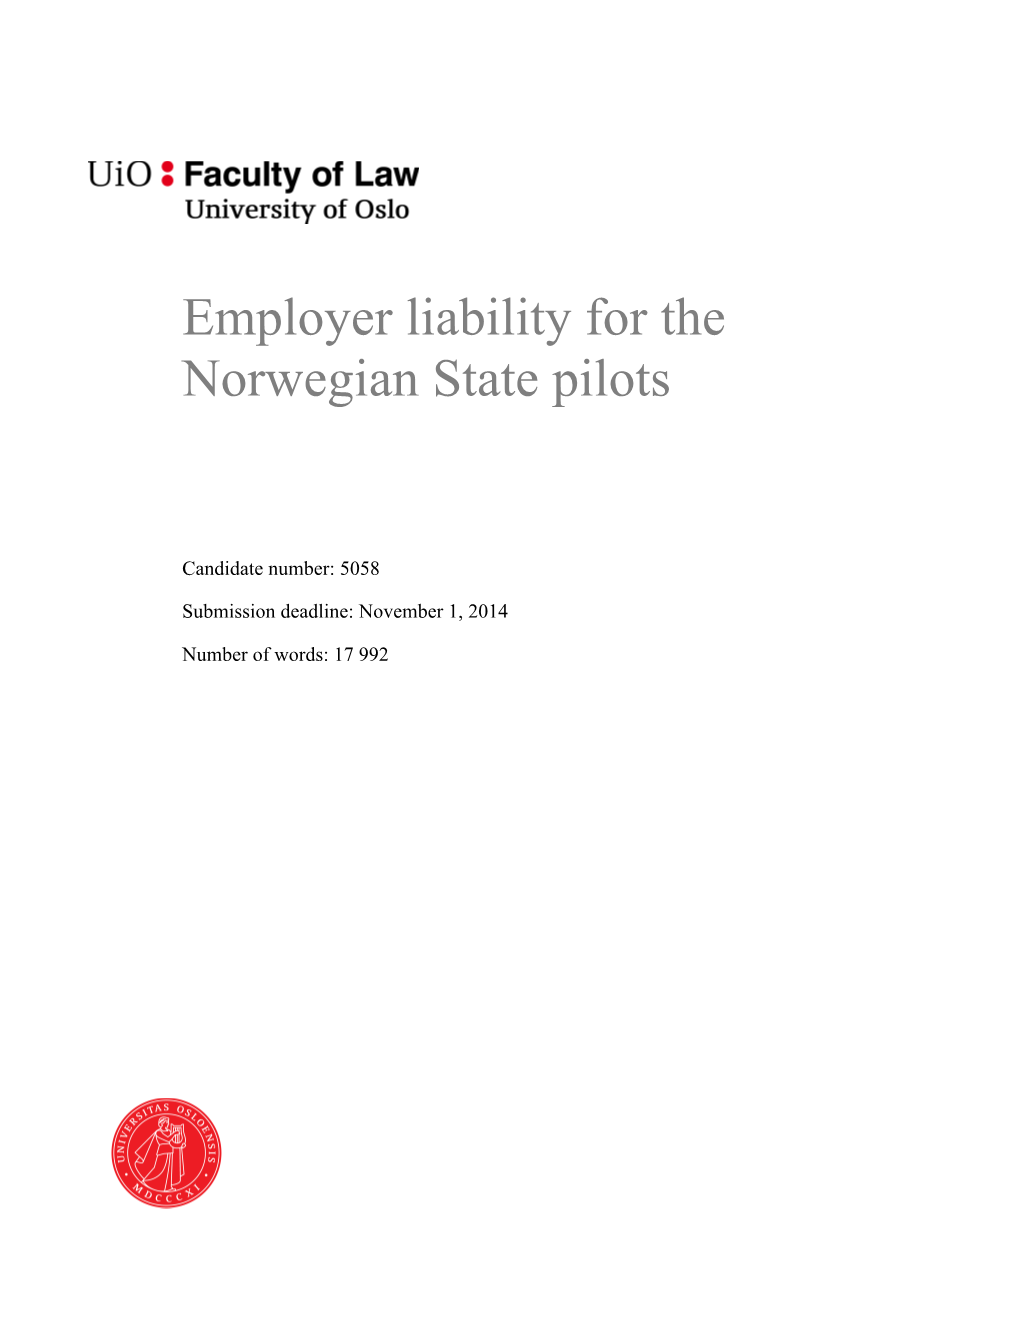 Employer Liability for the Norwegian State Pilots